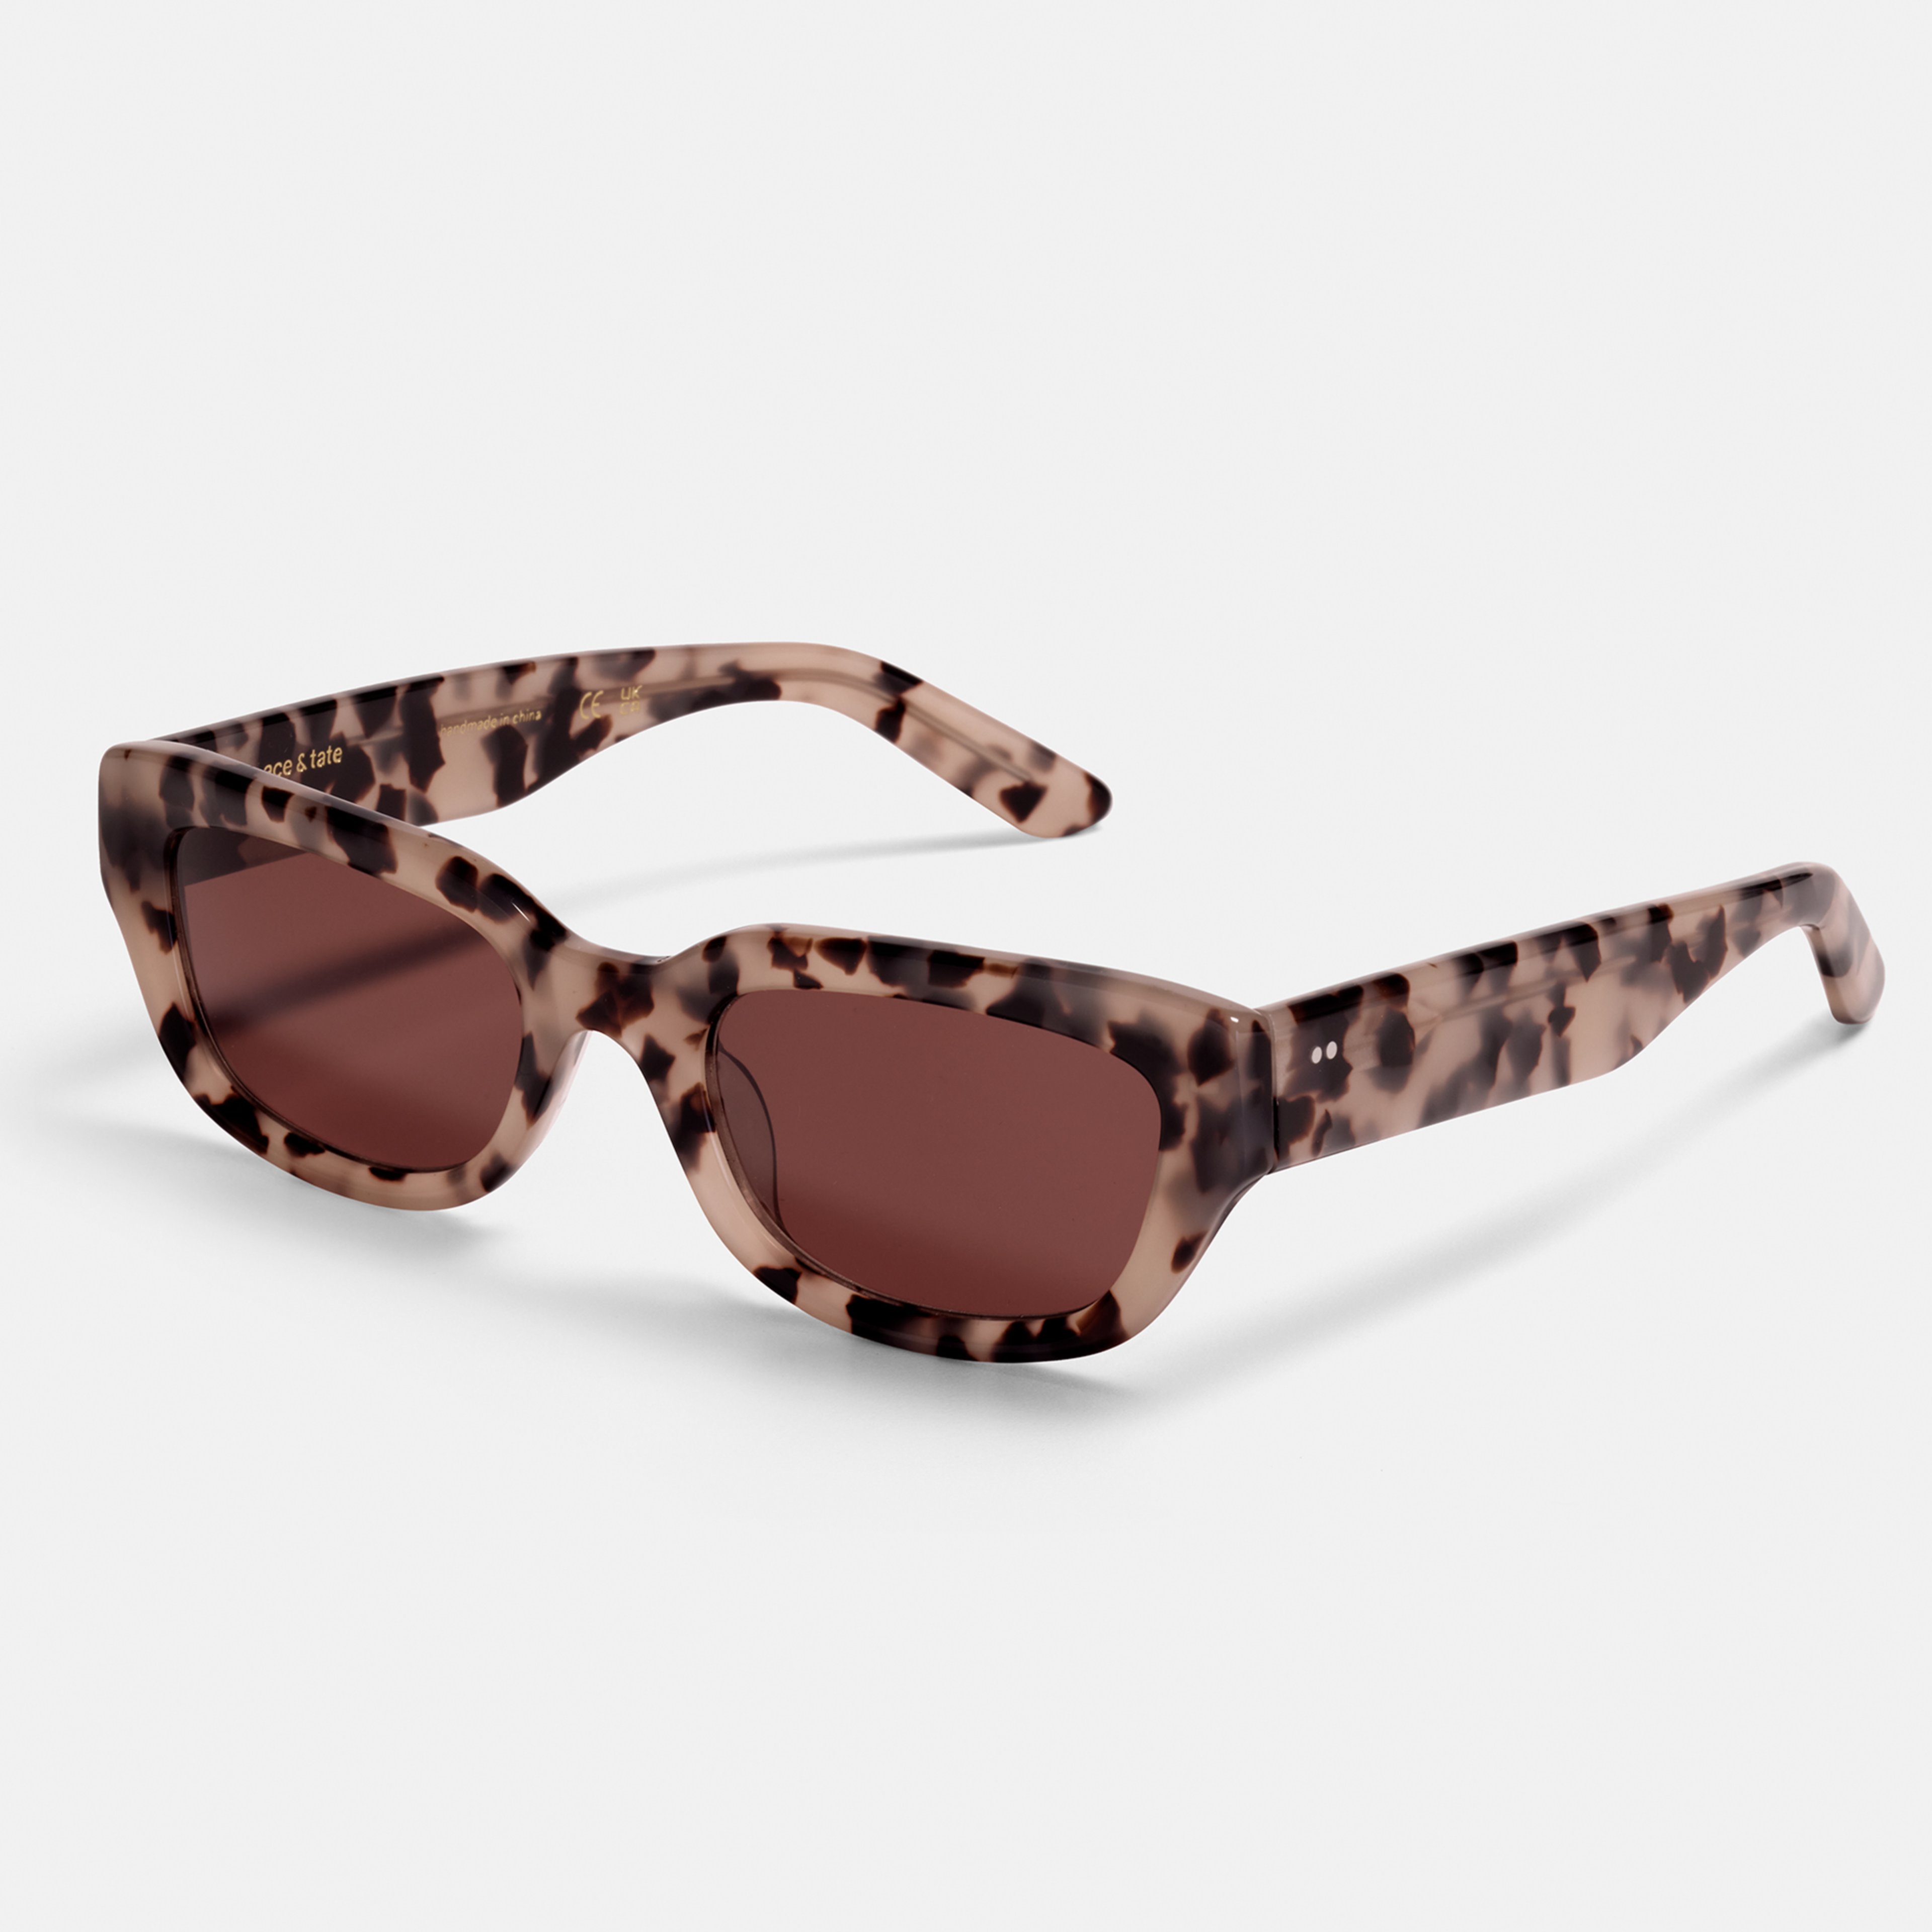 Ace & Tate Solaires | rectangulaire Bio-acétate in Beige, Marron